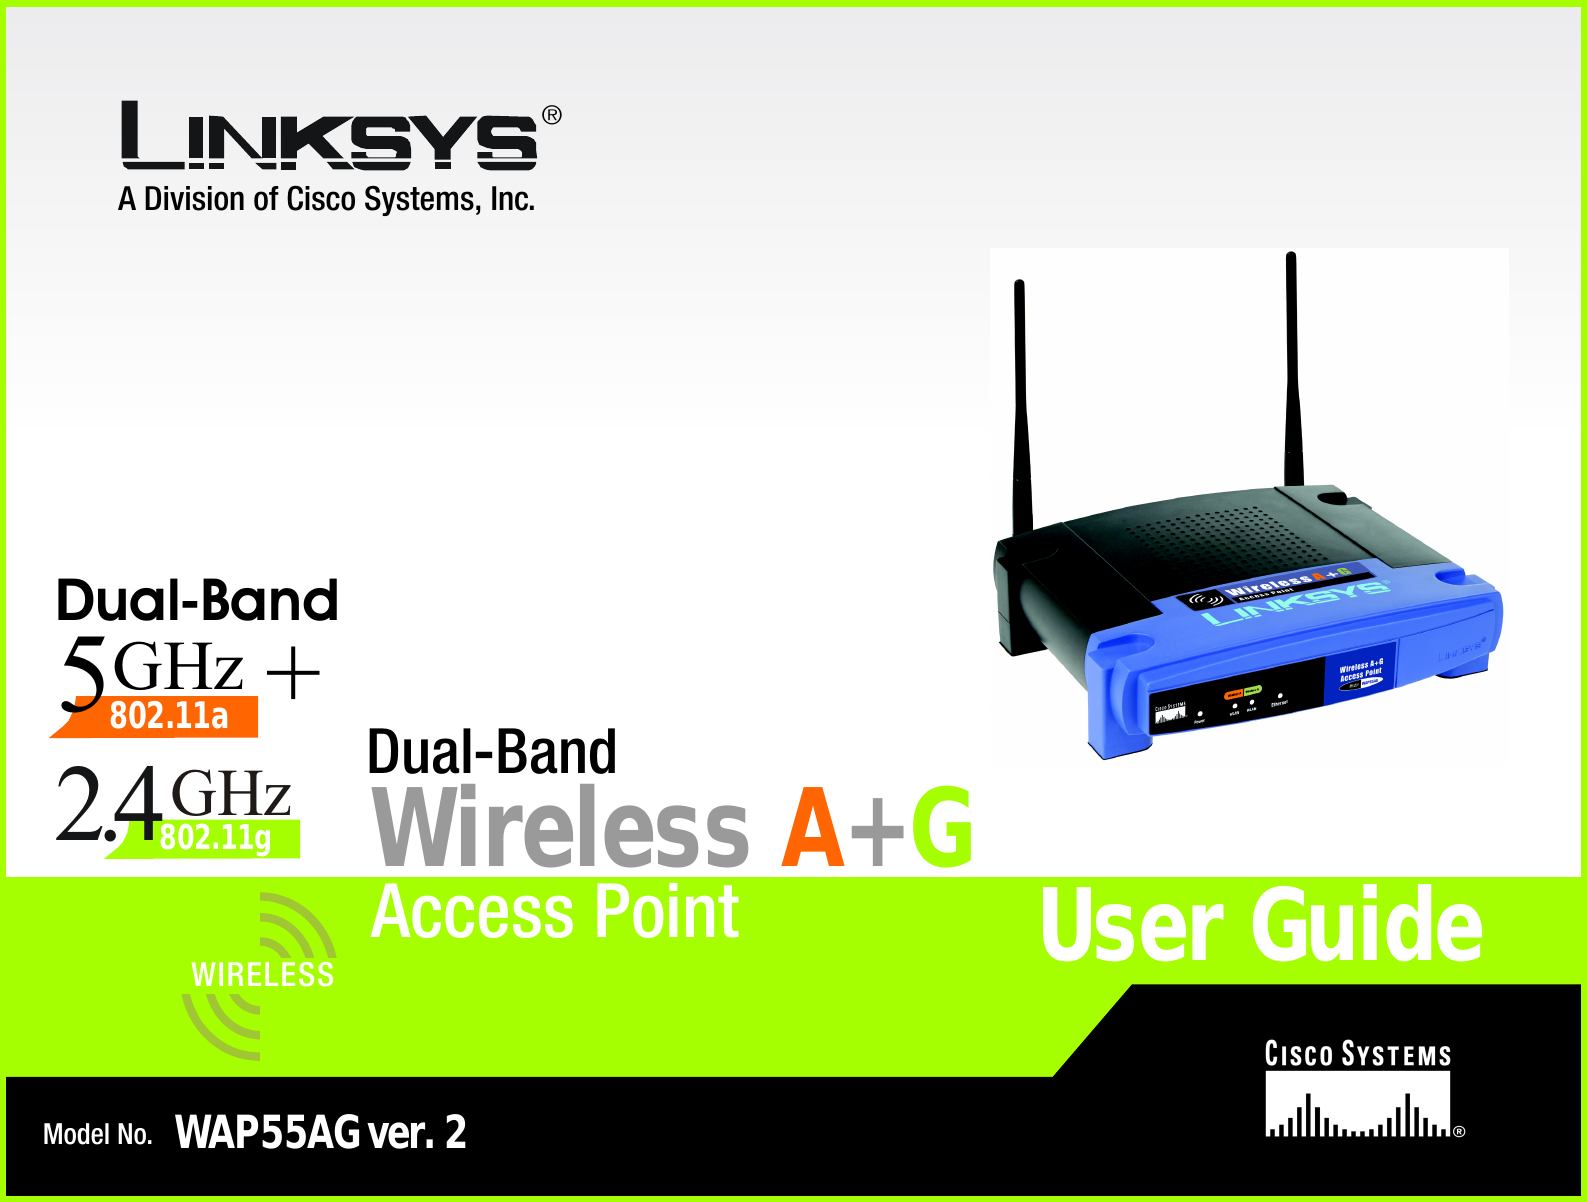 A Division of Cisco Systems, Inc.®Model No.Access PointWAP55AG ver. 2User GuideWIRELESSWireless A+GDual-BandGHz5GHz2.4802.11g802.11a+Dual-Band